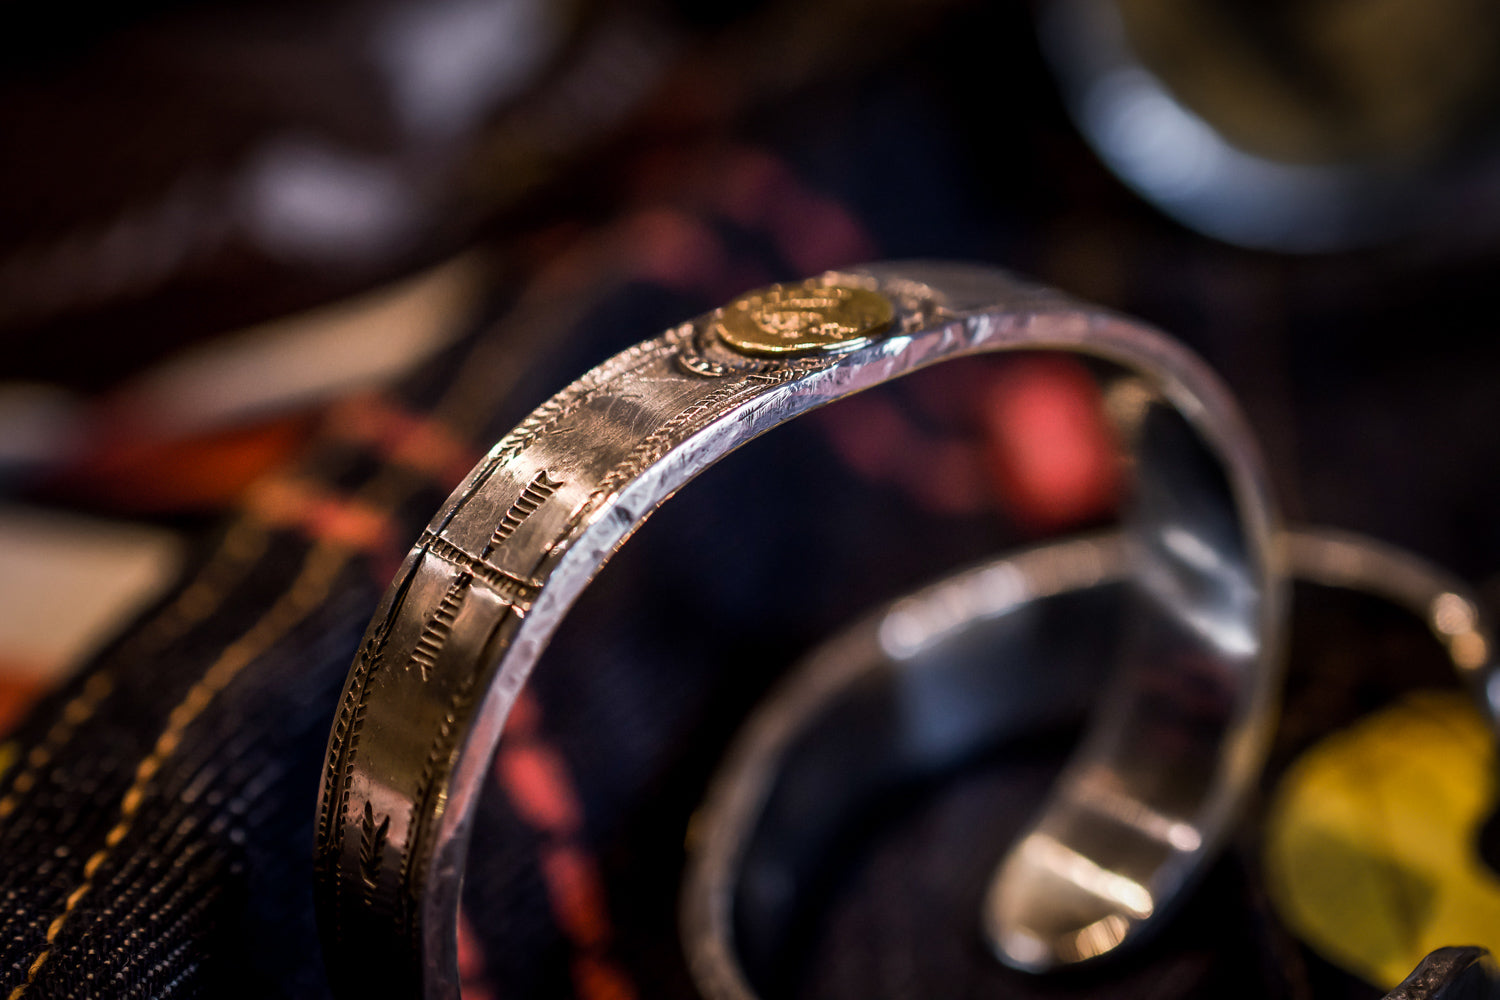 BISBEE COINSILVER BANGLE - 10mm - May club